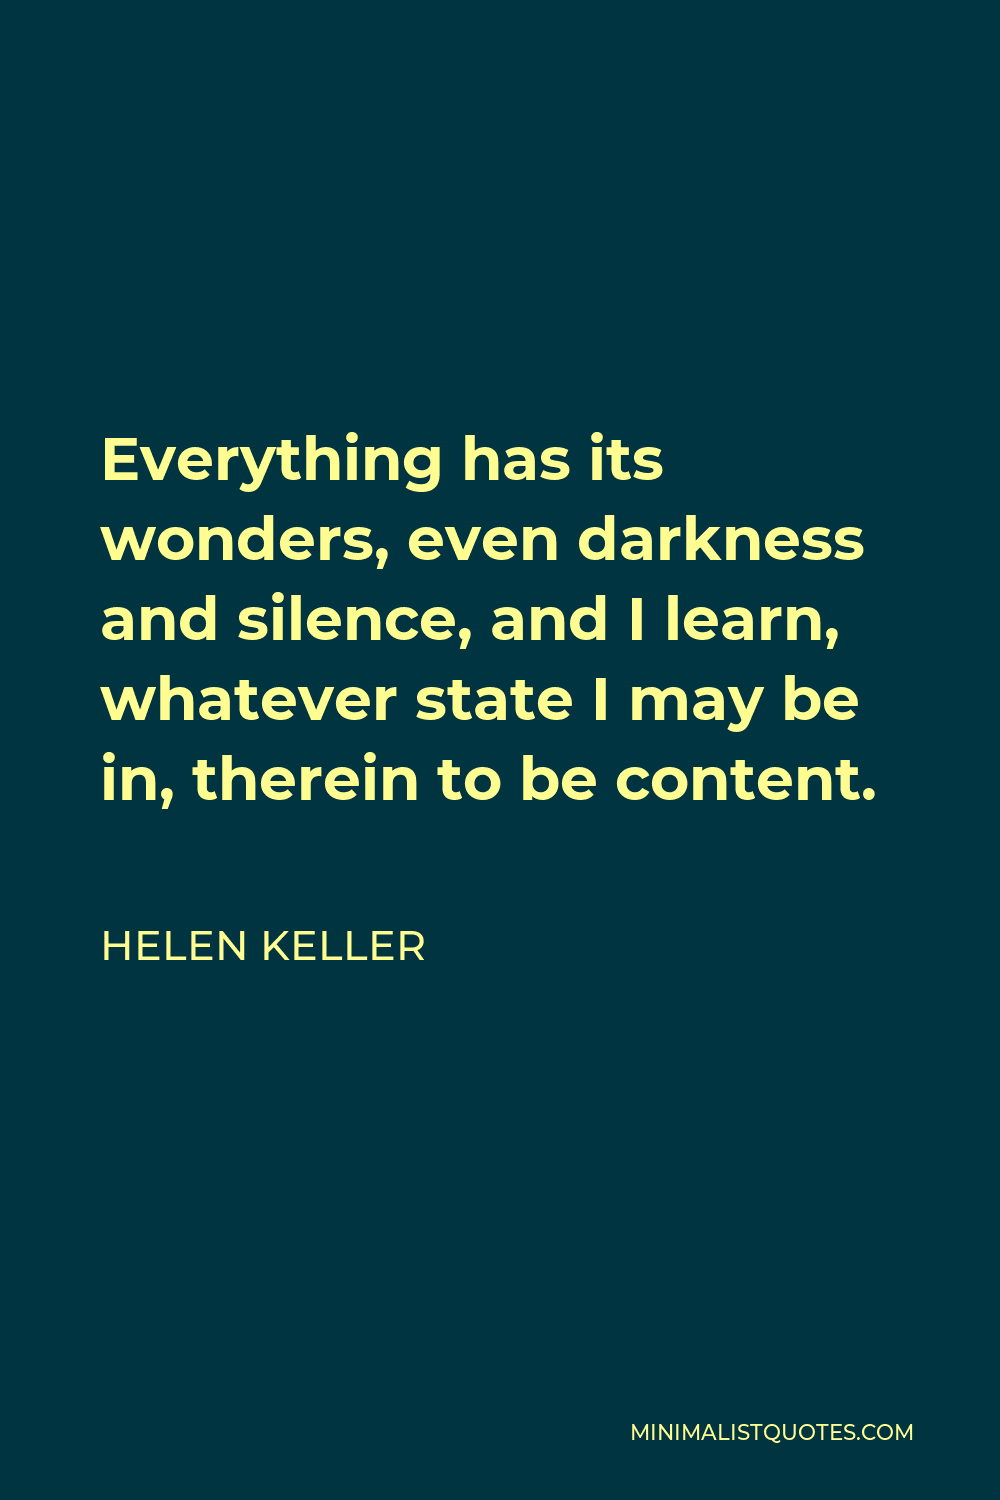 Helen Keller Quote - Everything has its wonders, even darkness and silence, and I learn, whatever state I may be in, therein to be content.